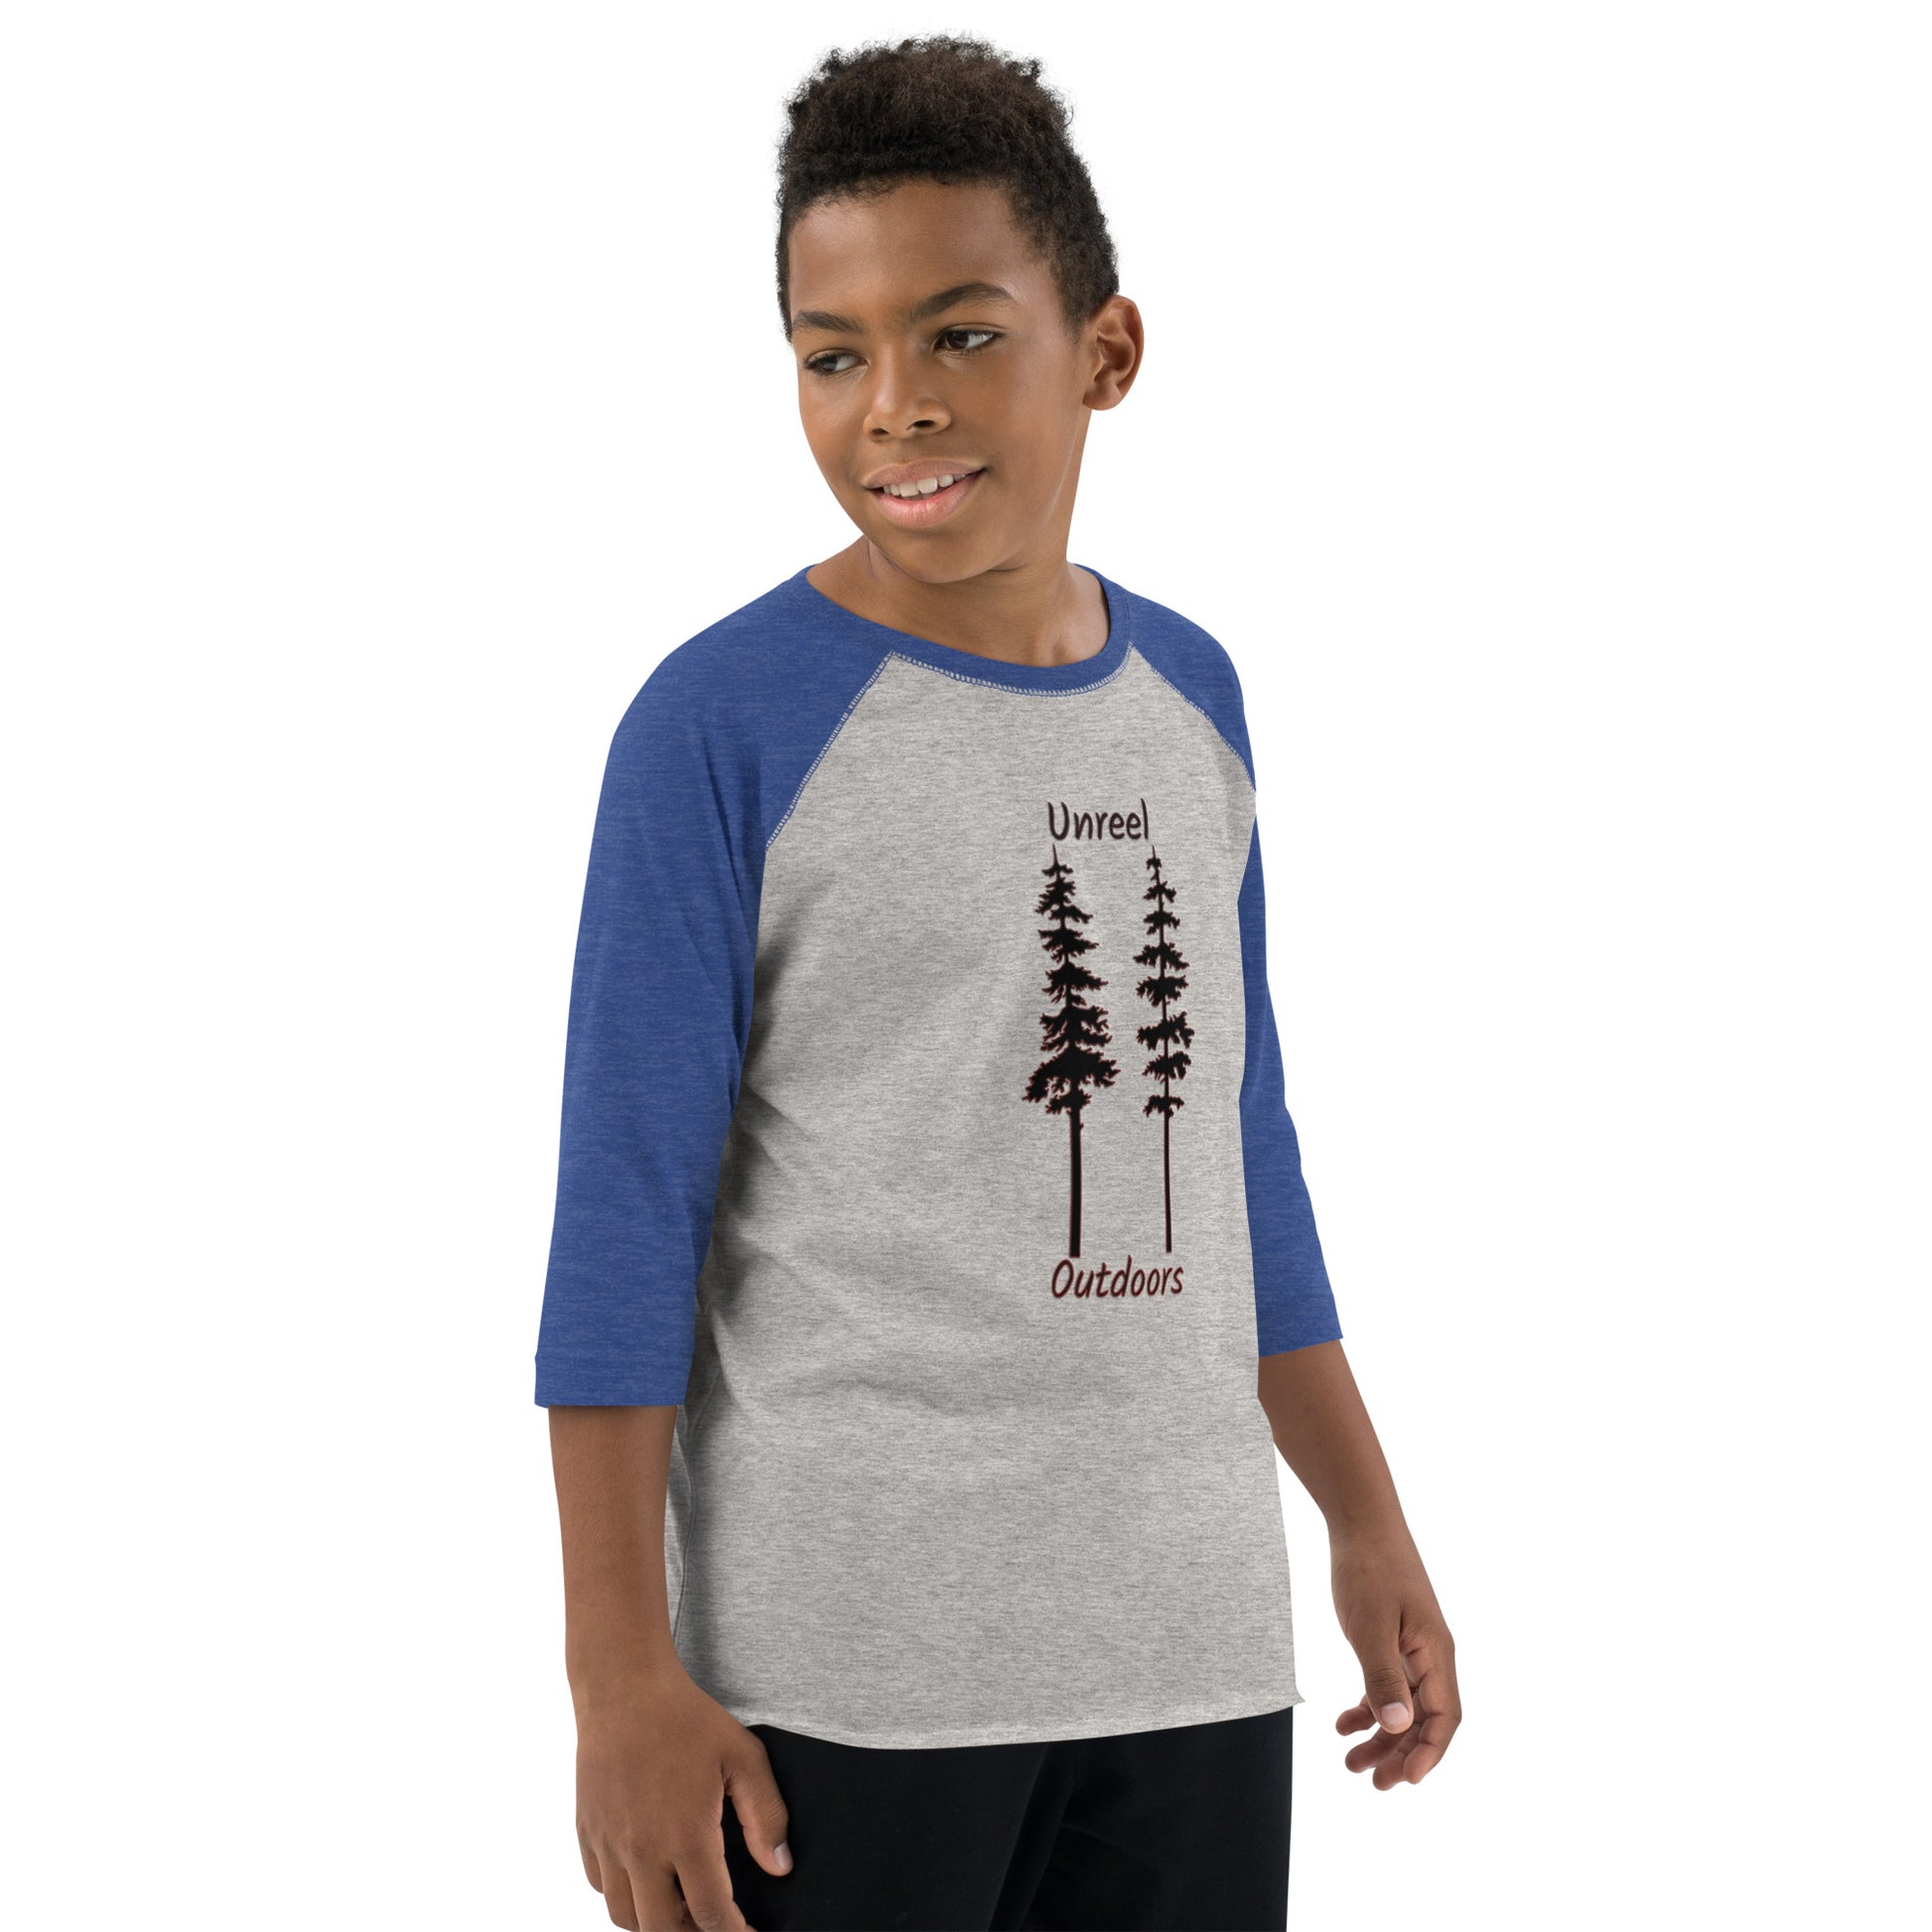 Unreel outdoors Youth baseball shirt - Unreel Clothes for fishing and the outdoors.